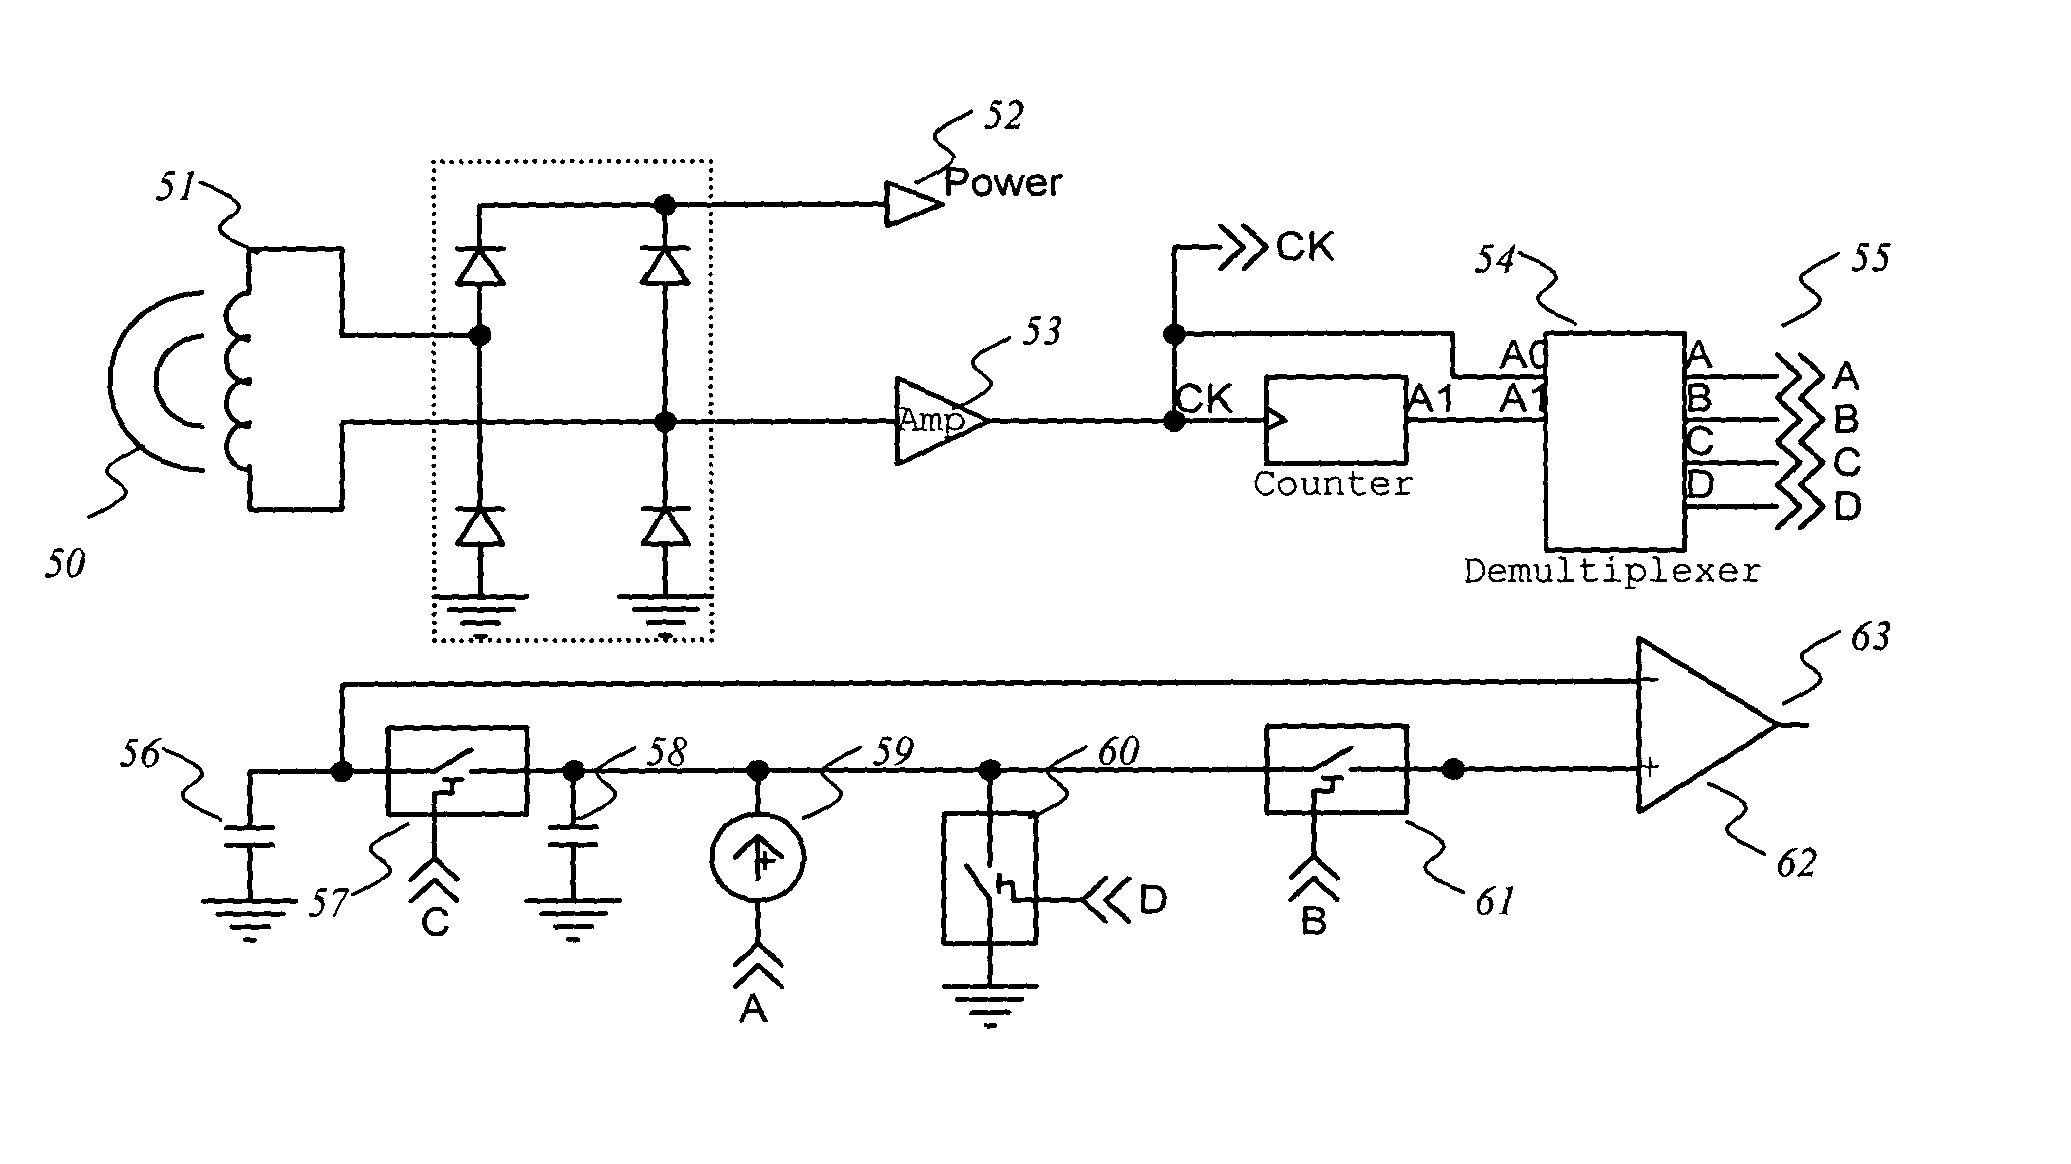 Inductive data and power link suitable for integration